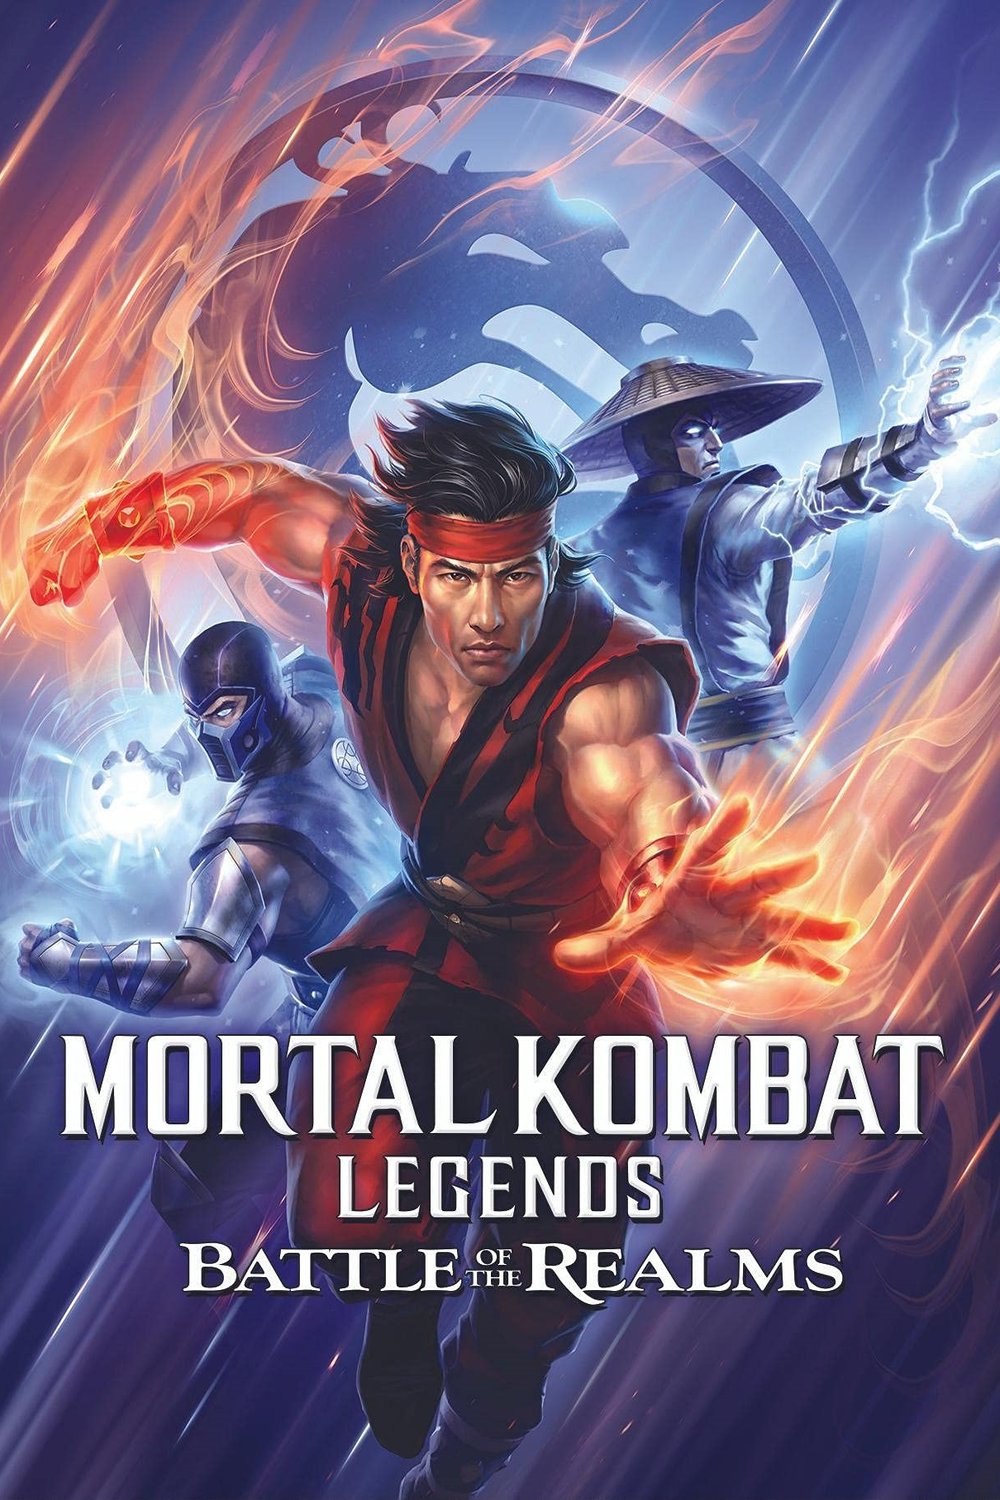 Poster of the movie Mortal Kombat Legends: Battle of the Realms